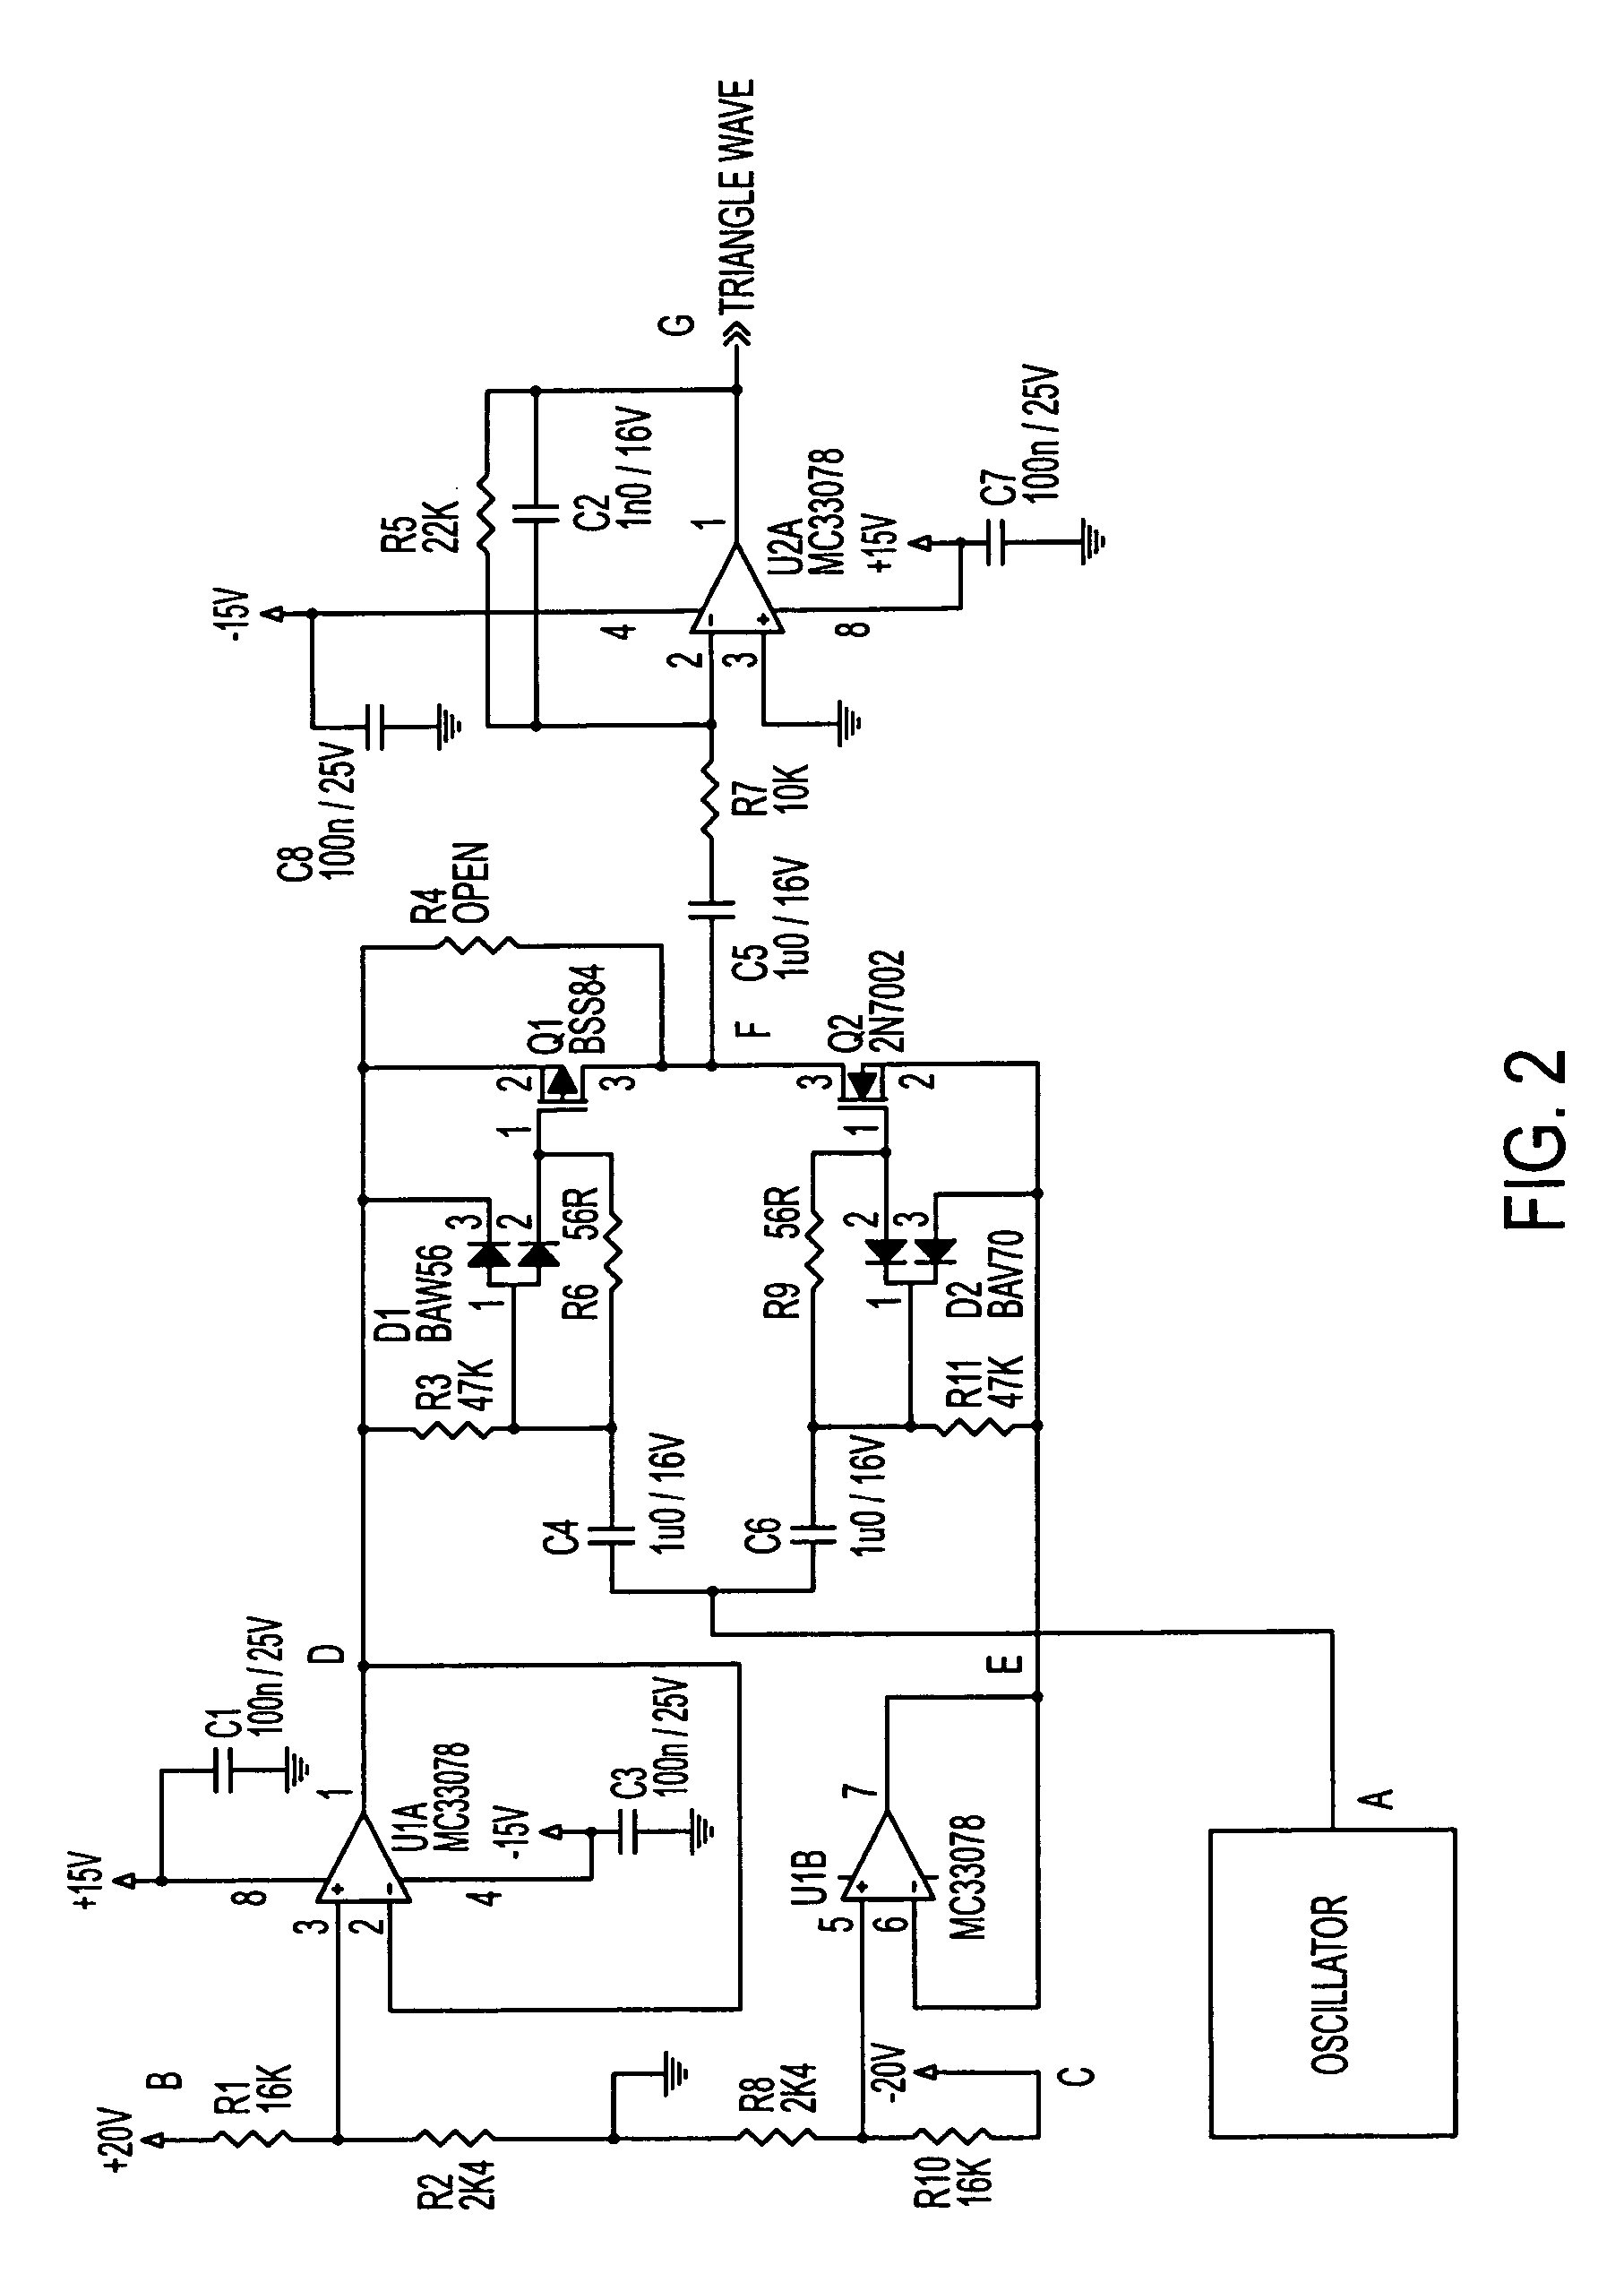 Power supply rejection for pulse width modulated amplifiers and automatic gain control